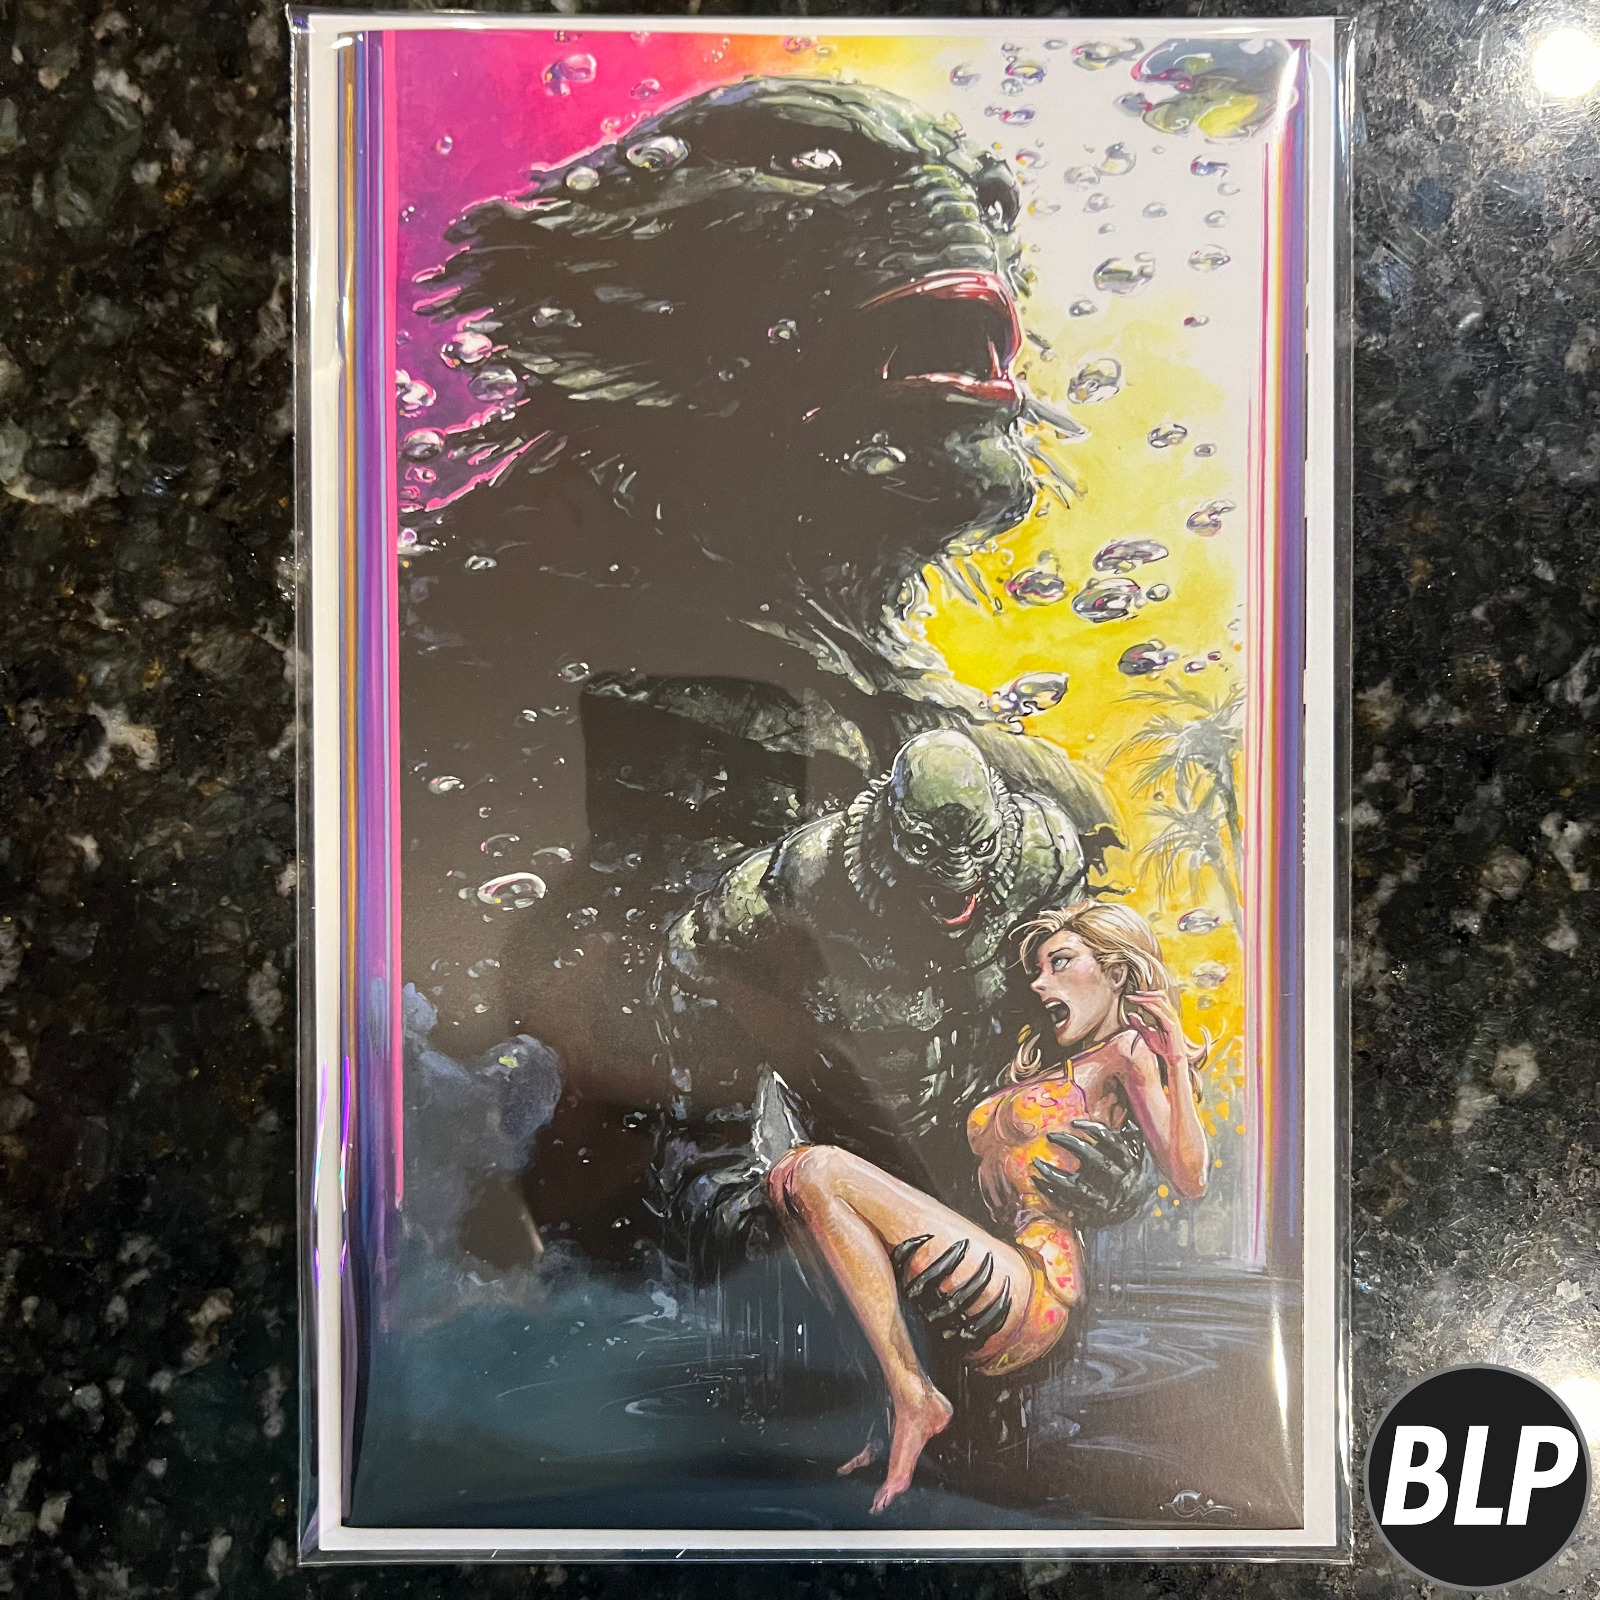 CREATURE FROM THE BLACK LAGOON LIVES #1 CLAYTON CRAIN VARIANT LTD /200 IN HAND